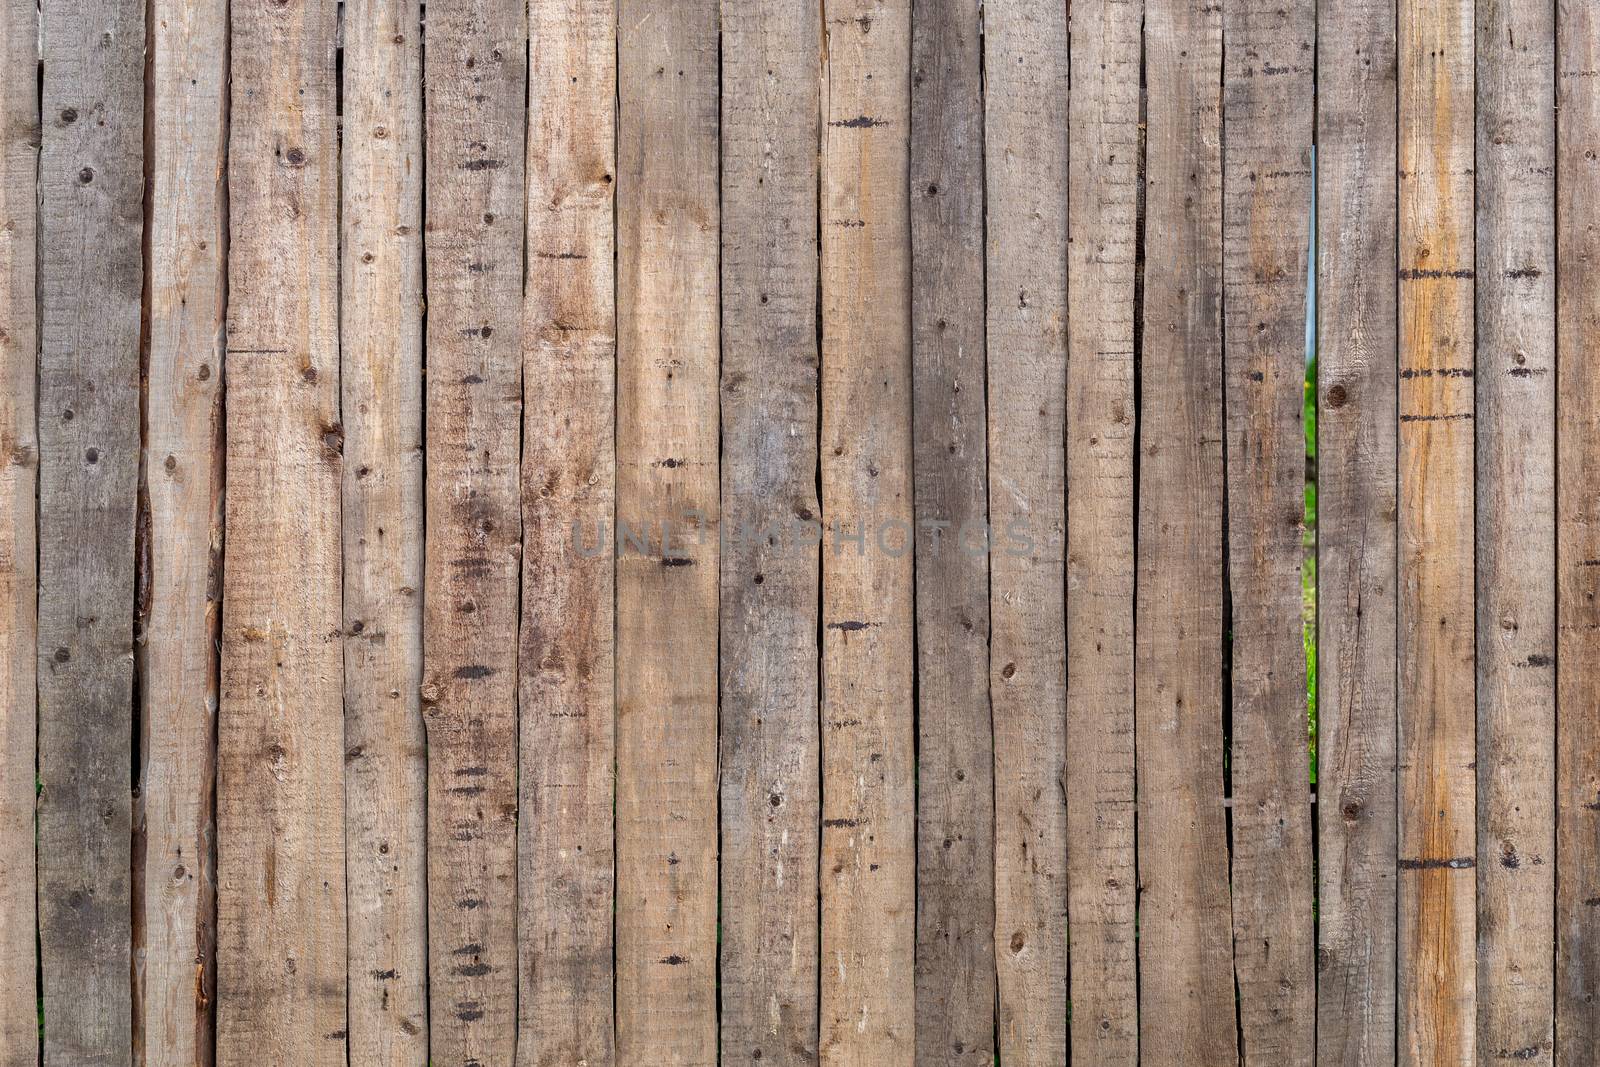 dry bare wooden planks fence flat surface full frame texture and background.